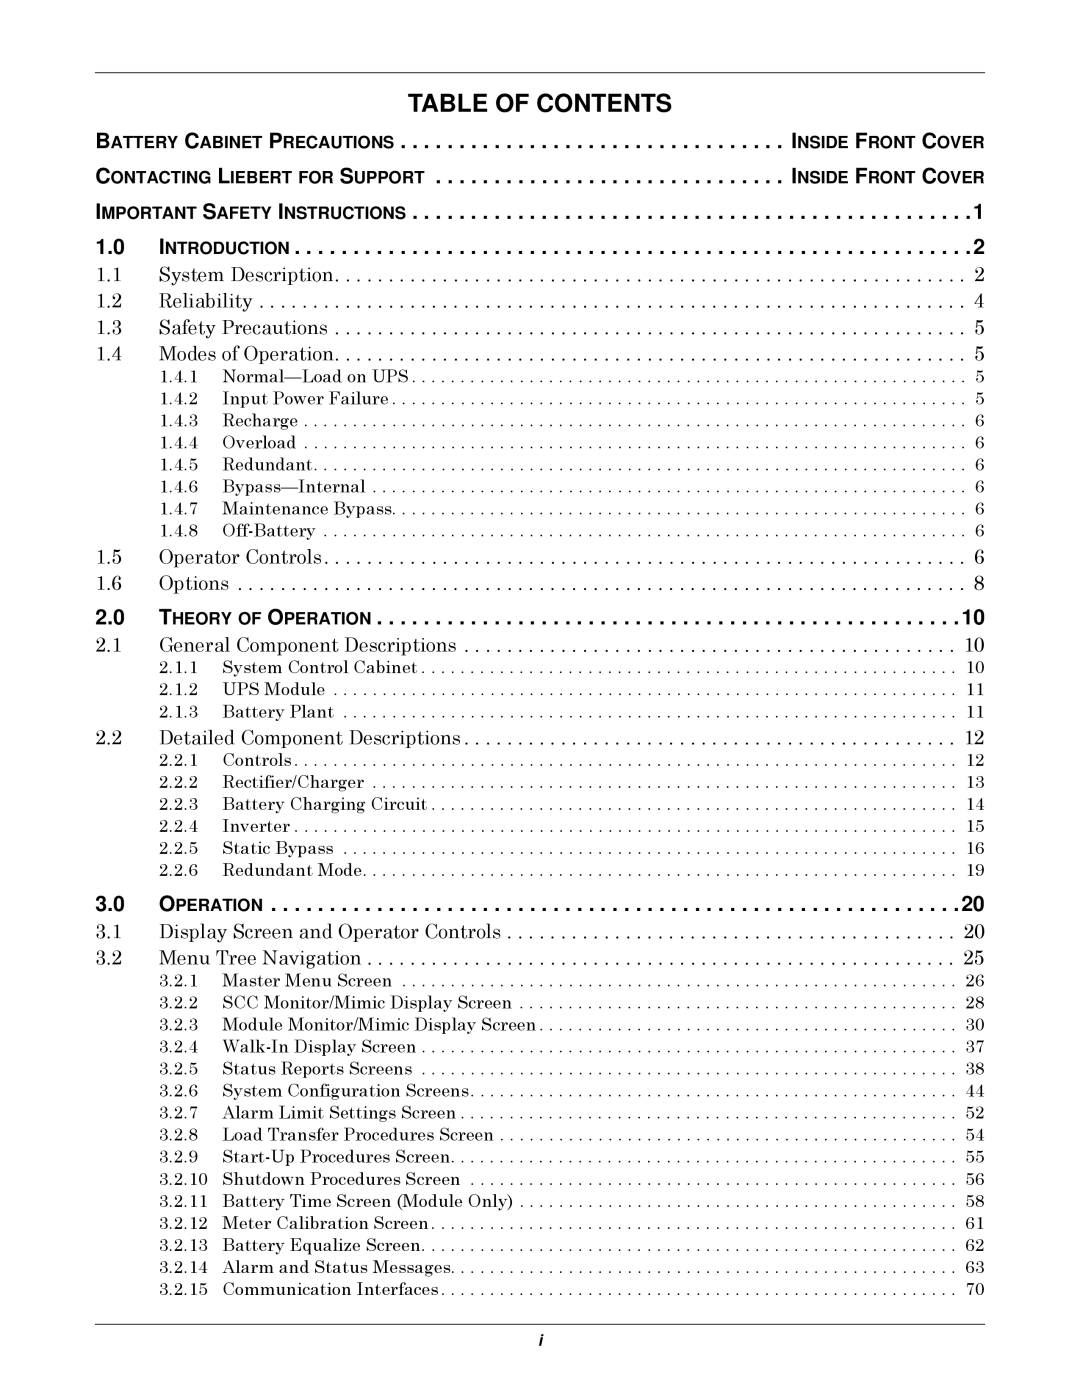 Emerson Series 610 manual Table Of Contents 